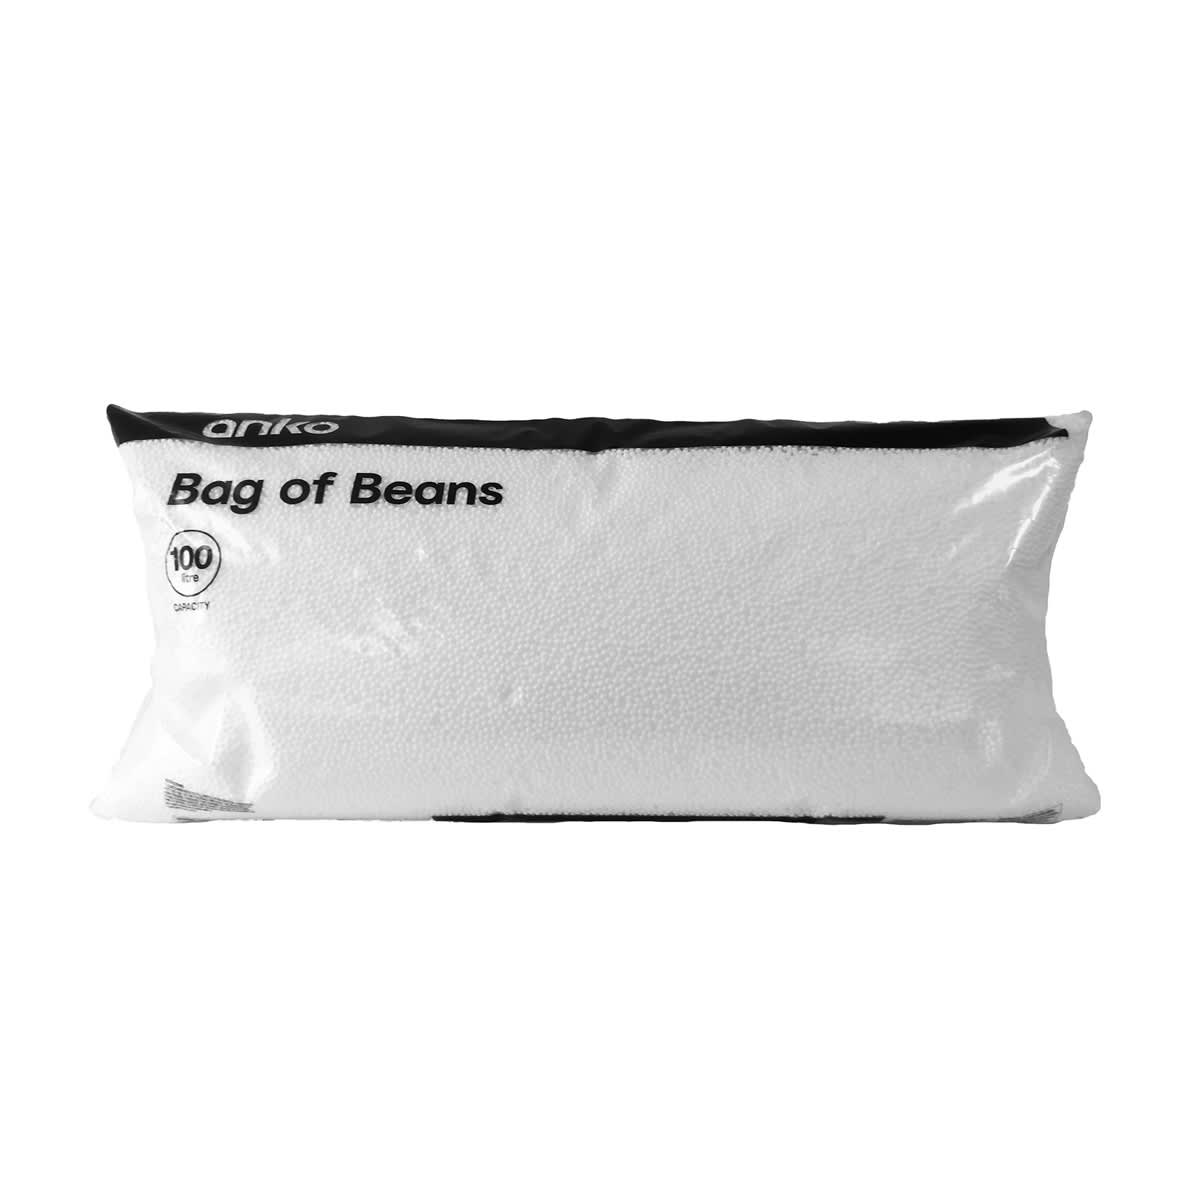 How much beans required to fill XL bean bag? - Quora